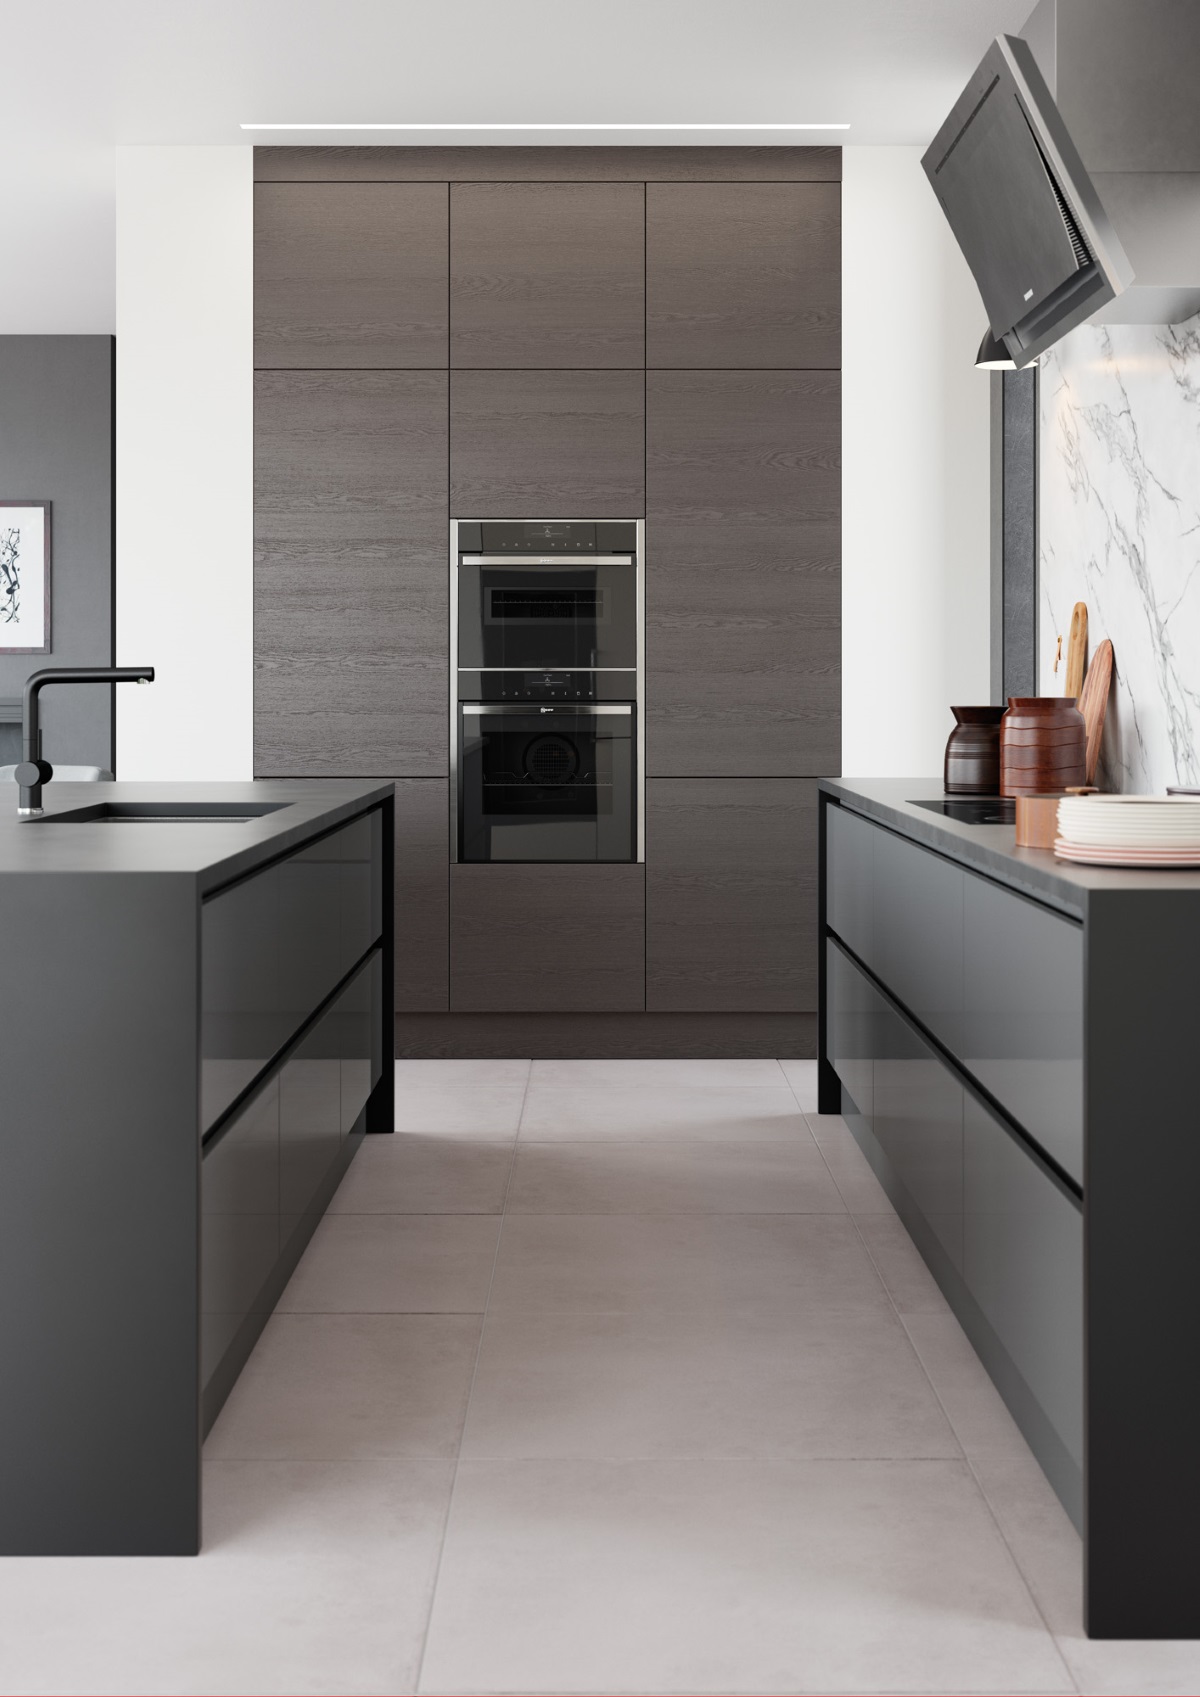 Zola Gloss Dust Grey and Tavola Anthracite